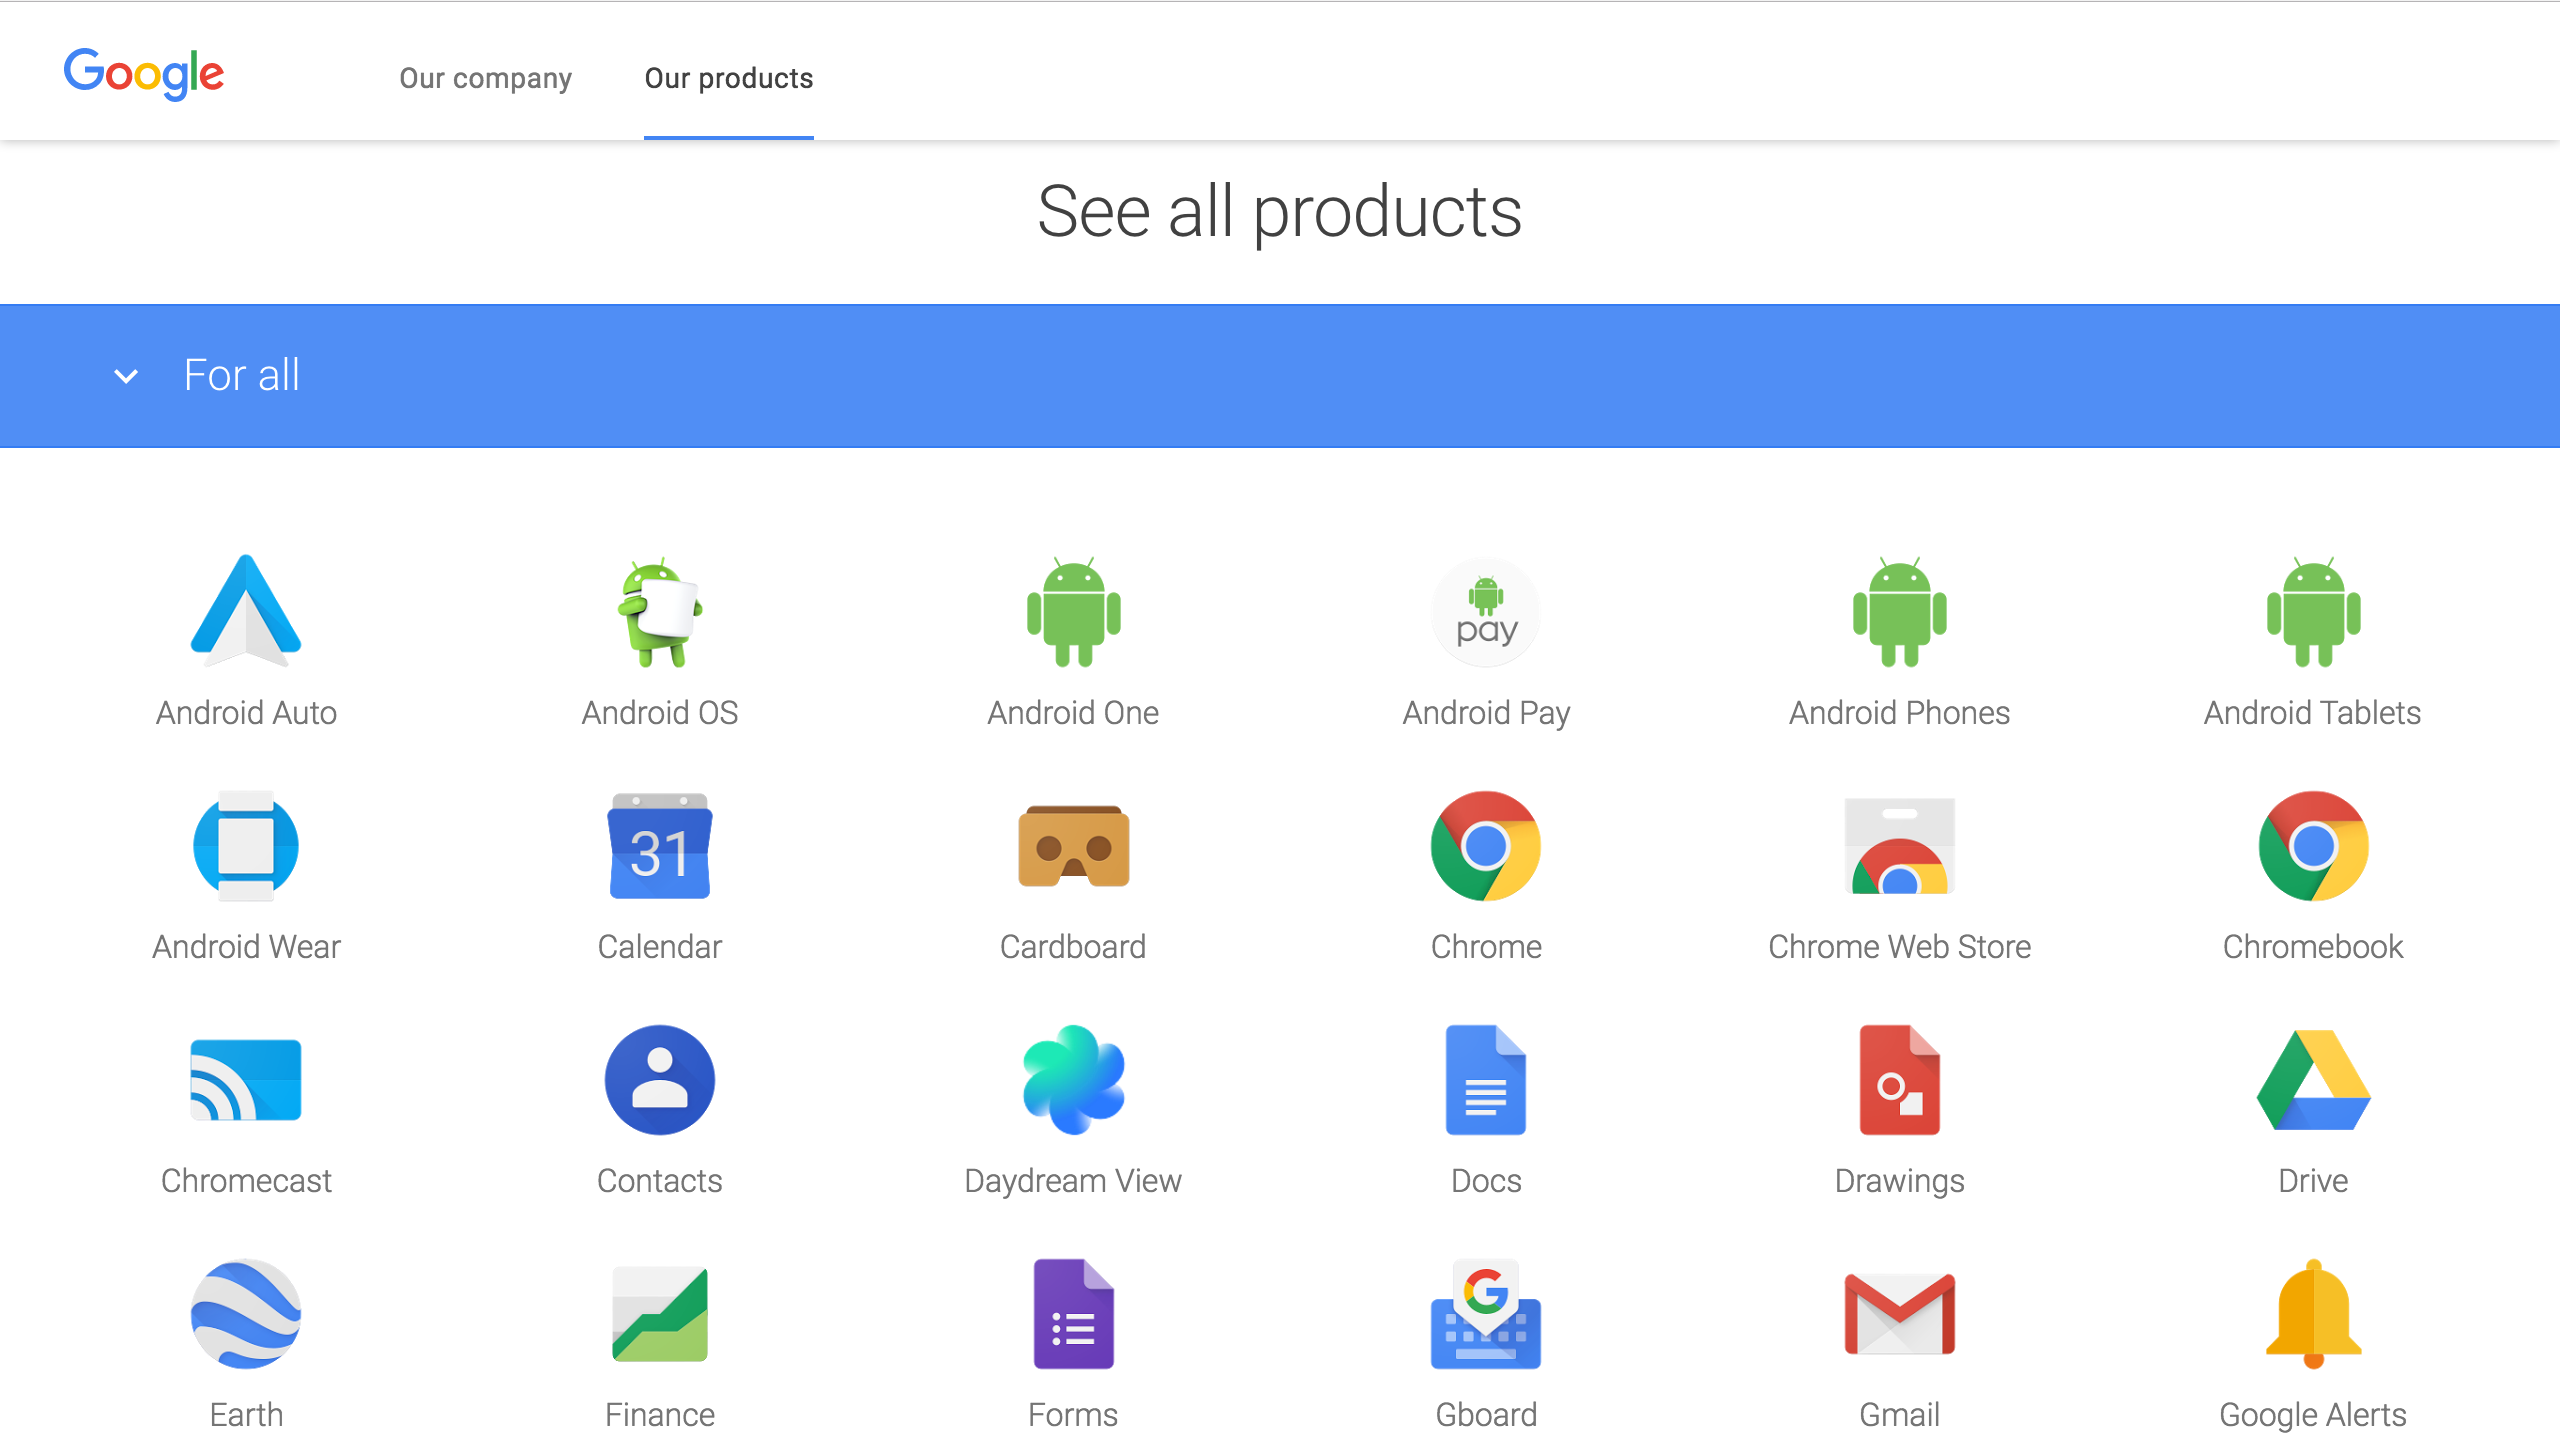 Google's redesigned product page showcases the company's entire hardware & software line